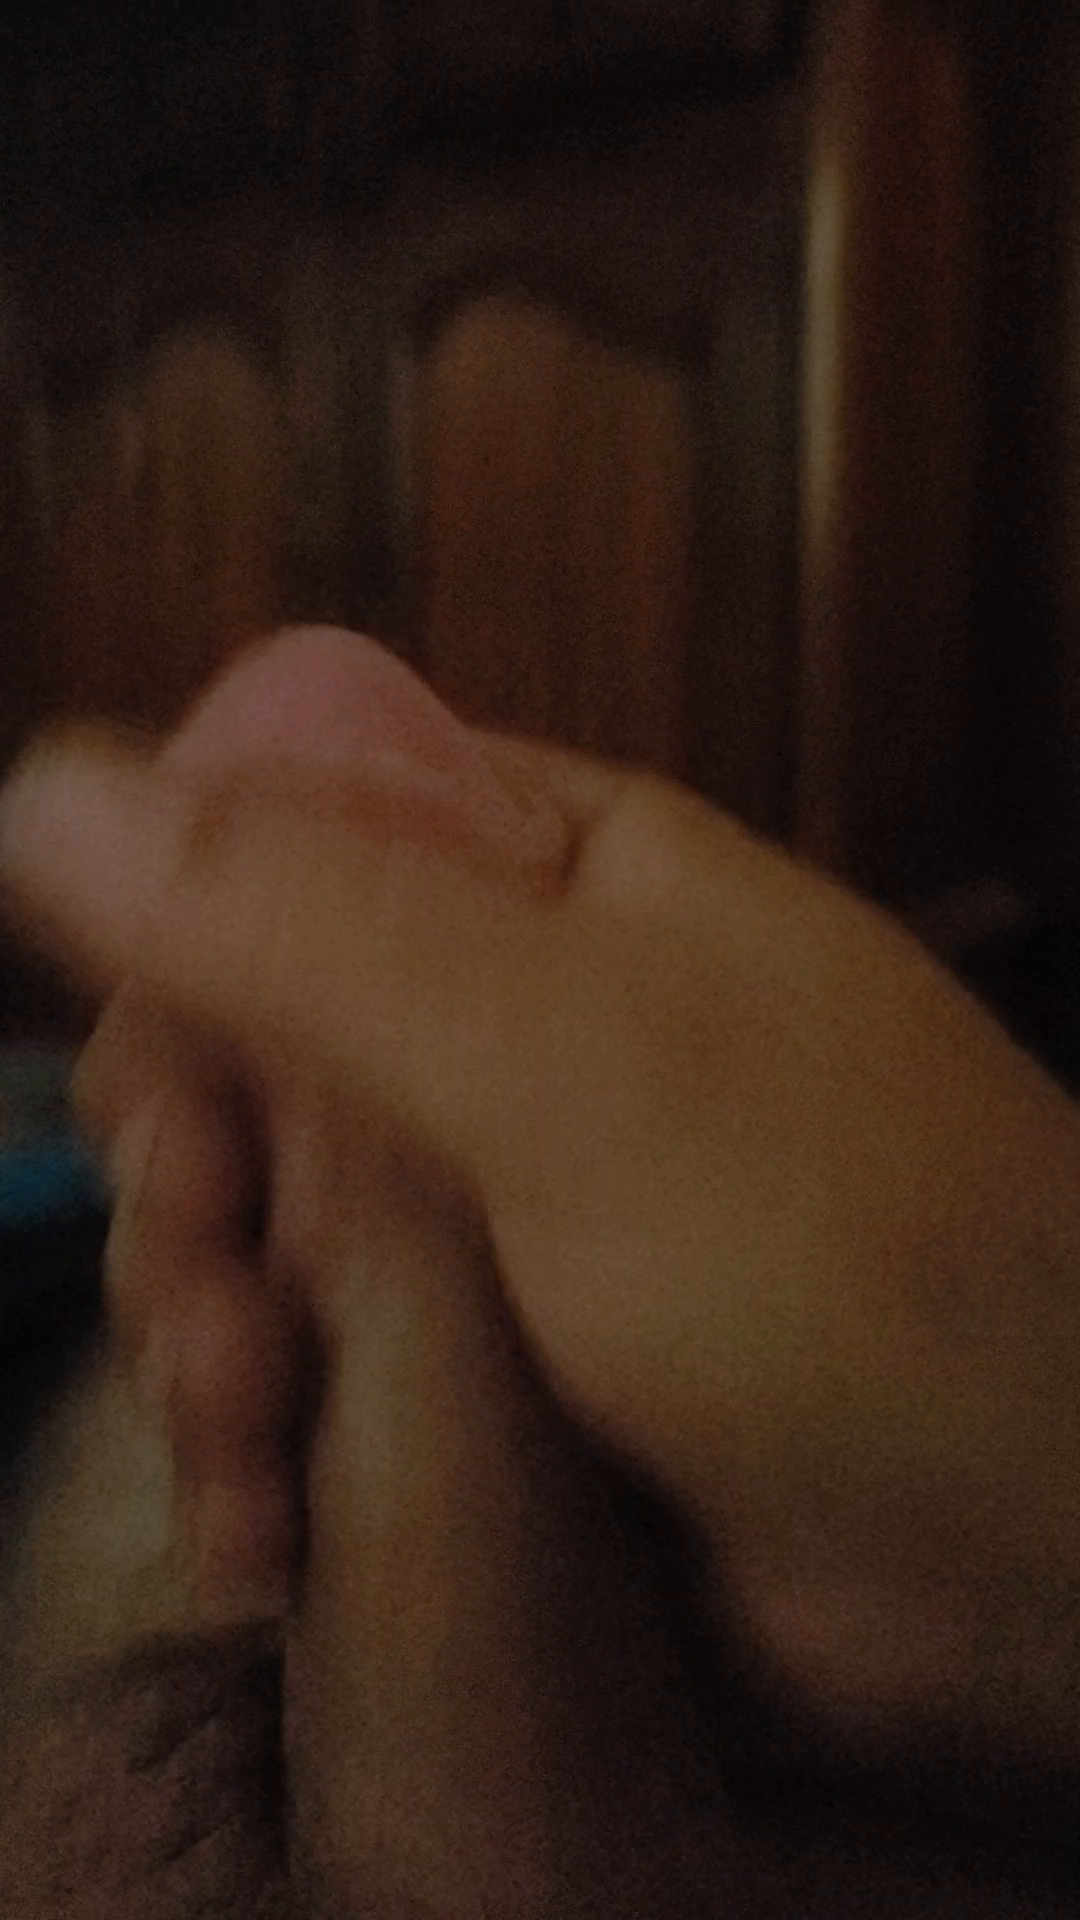 Video post by Sexywifefantasy69